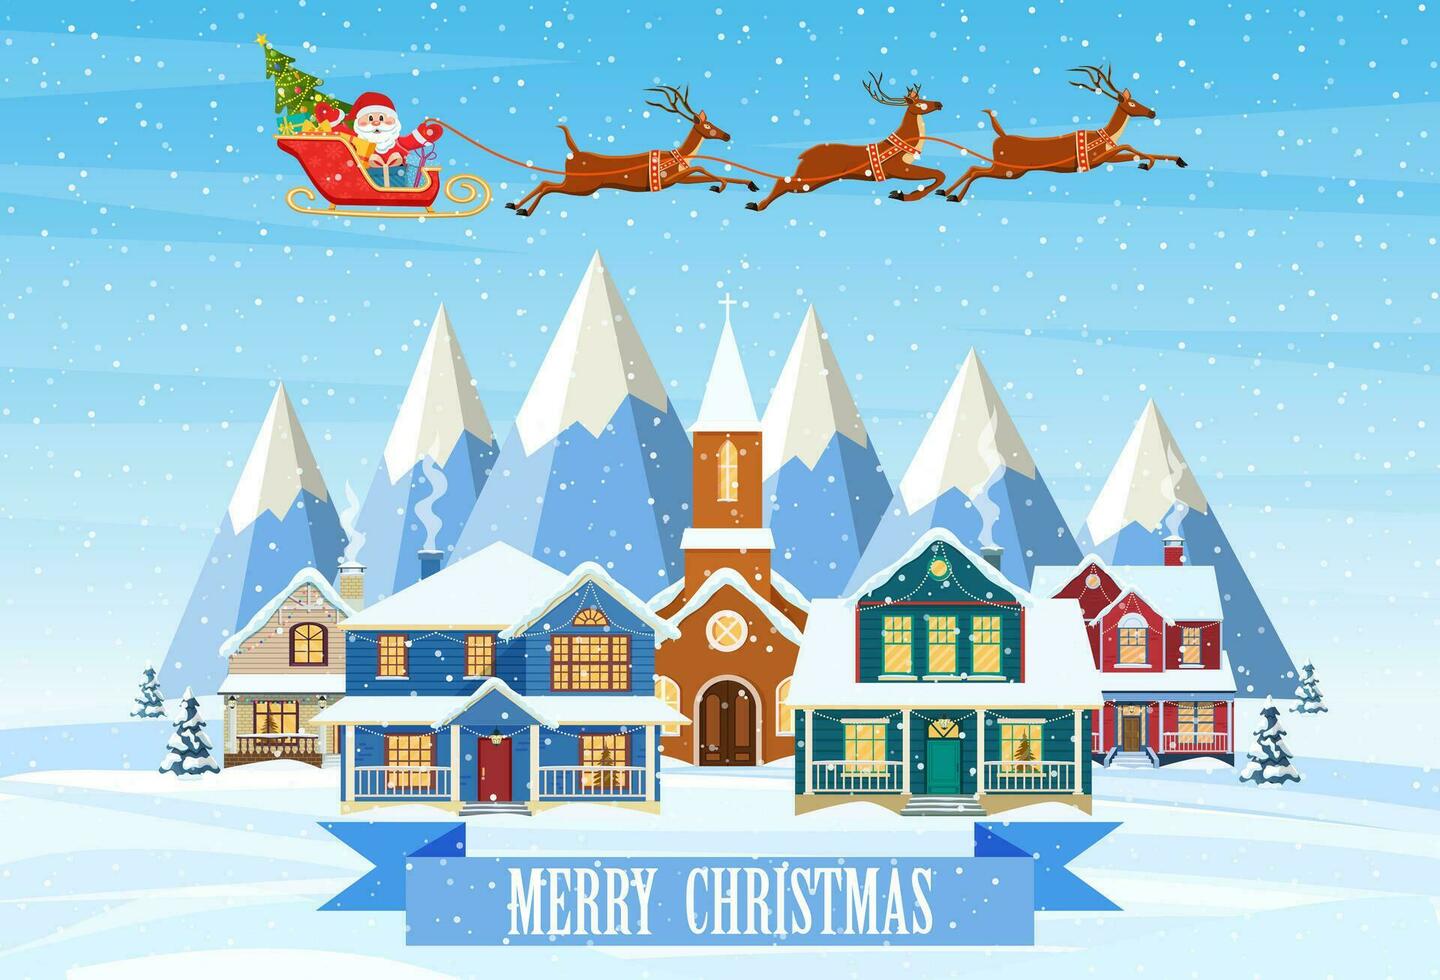 A house in a snowy Christmas landscape. Santa Claus on a sleigh. concept for greeting or postal card. Merry christmas holiday. New year and xmas celebration vector